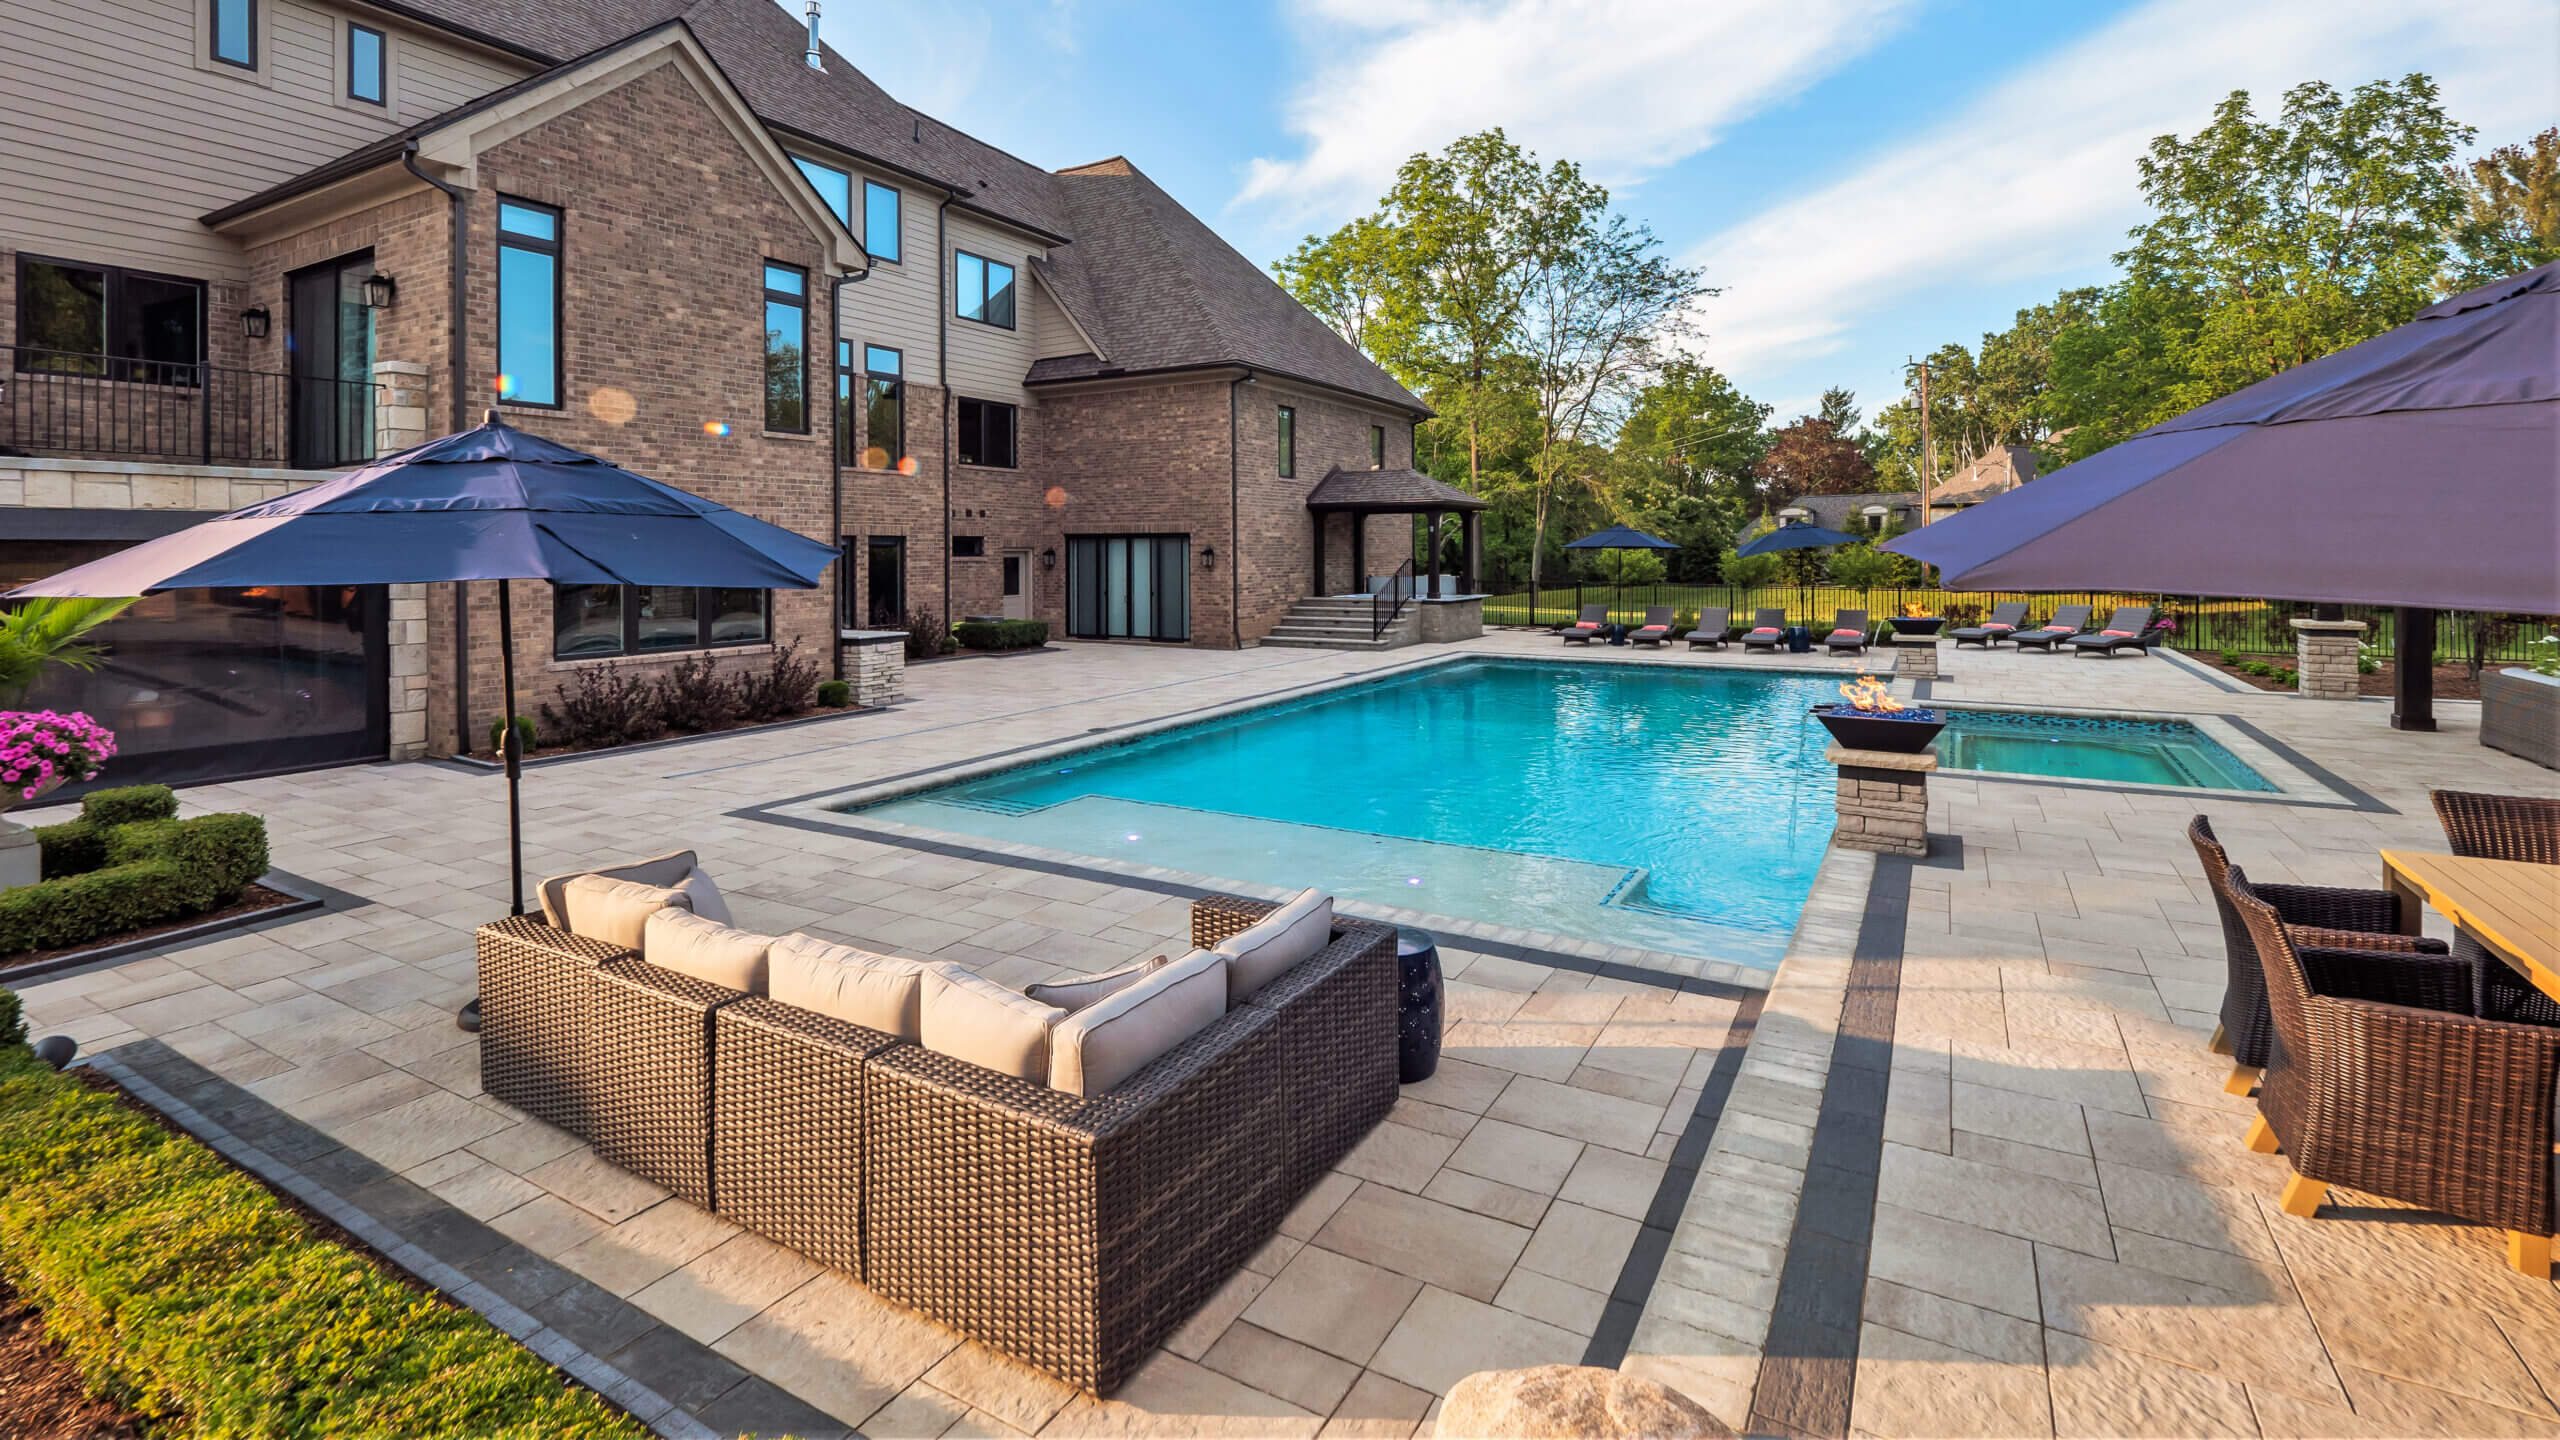 gunite pools, patio pavers, concrete paving, inground pools, pool and spa, fire bowls, patio covers in michigan, patio ideas, pool inspo, gazebos in michigan, cabanas in Michigan, backyard design, backyard landscape design, fire bowls, pool fountains, concrete builders, unilock, outdoor fireplaces in michigan, jacuzzi, outdoor hot tubs, pergola, gazebo, backyard ideas, patio design near me, fire glass, backyard ideas, landscape architecture, landscaping services, outdoor design inspo